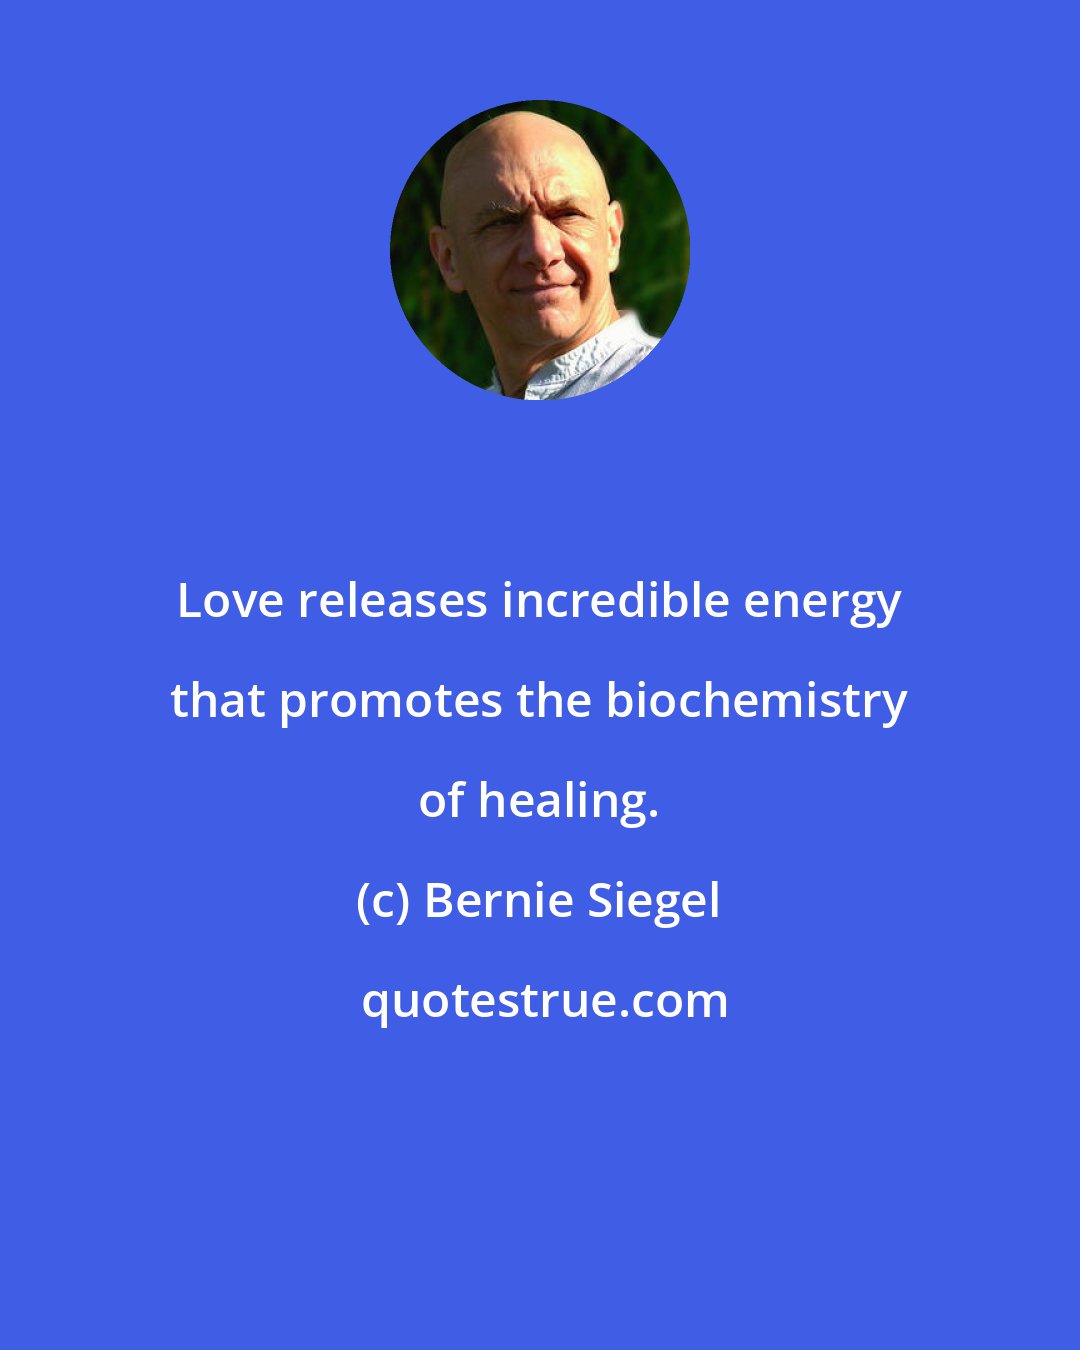 Bernie Siegel: Love releases incredible energy that promotes the biochemistry of healing.